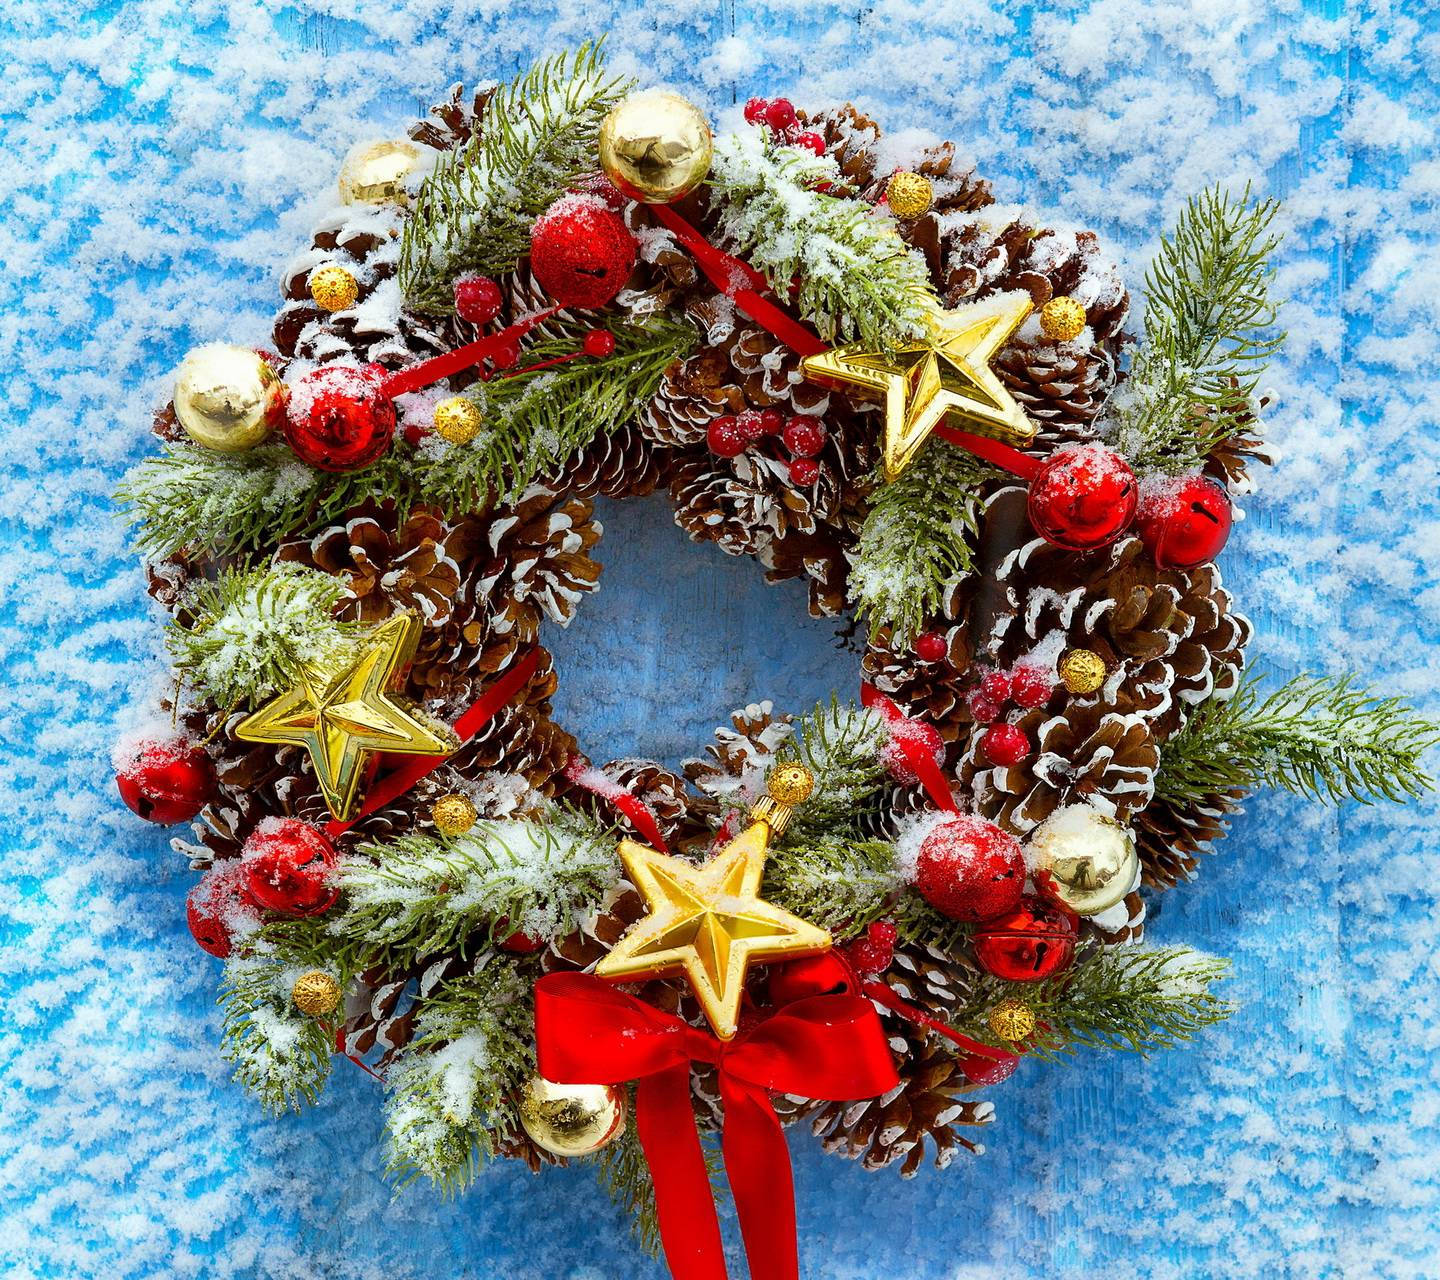 Majestic Christmas Wreath Embellished With Golden Stars